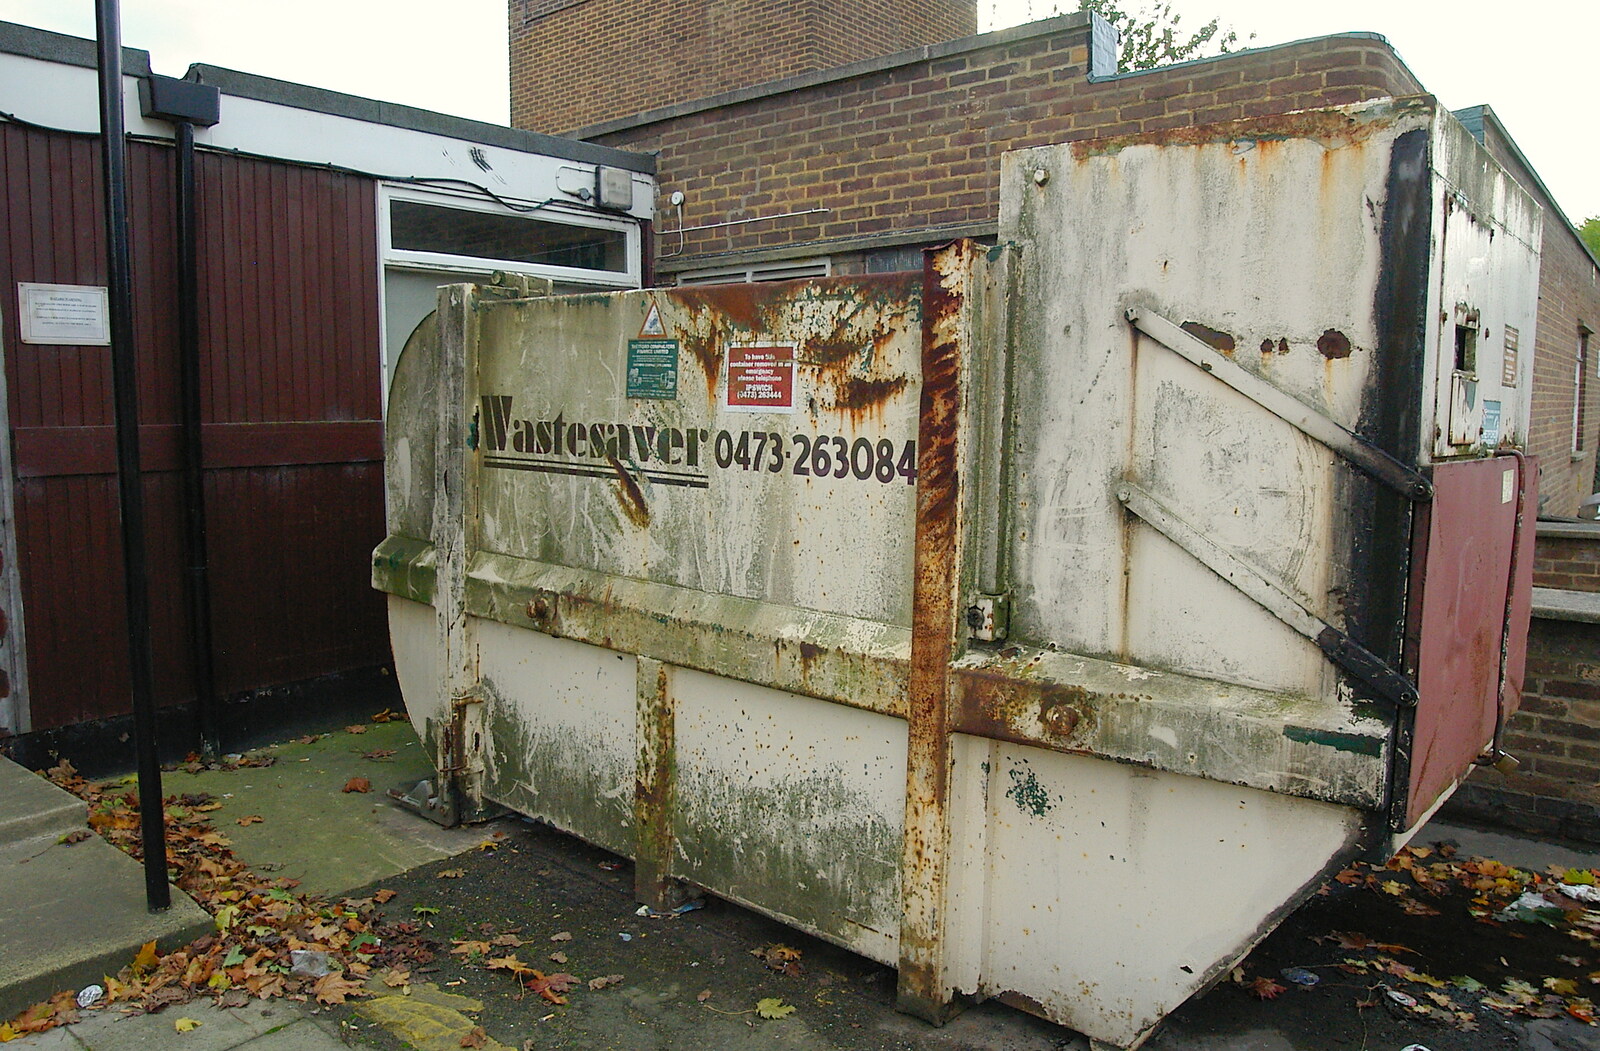 Suffolk County Council Dereliction, and Cotton Flamenco, Suffolk - 22nd October 2005: Old rubbish compactor by Suffolk Design and Print